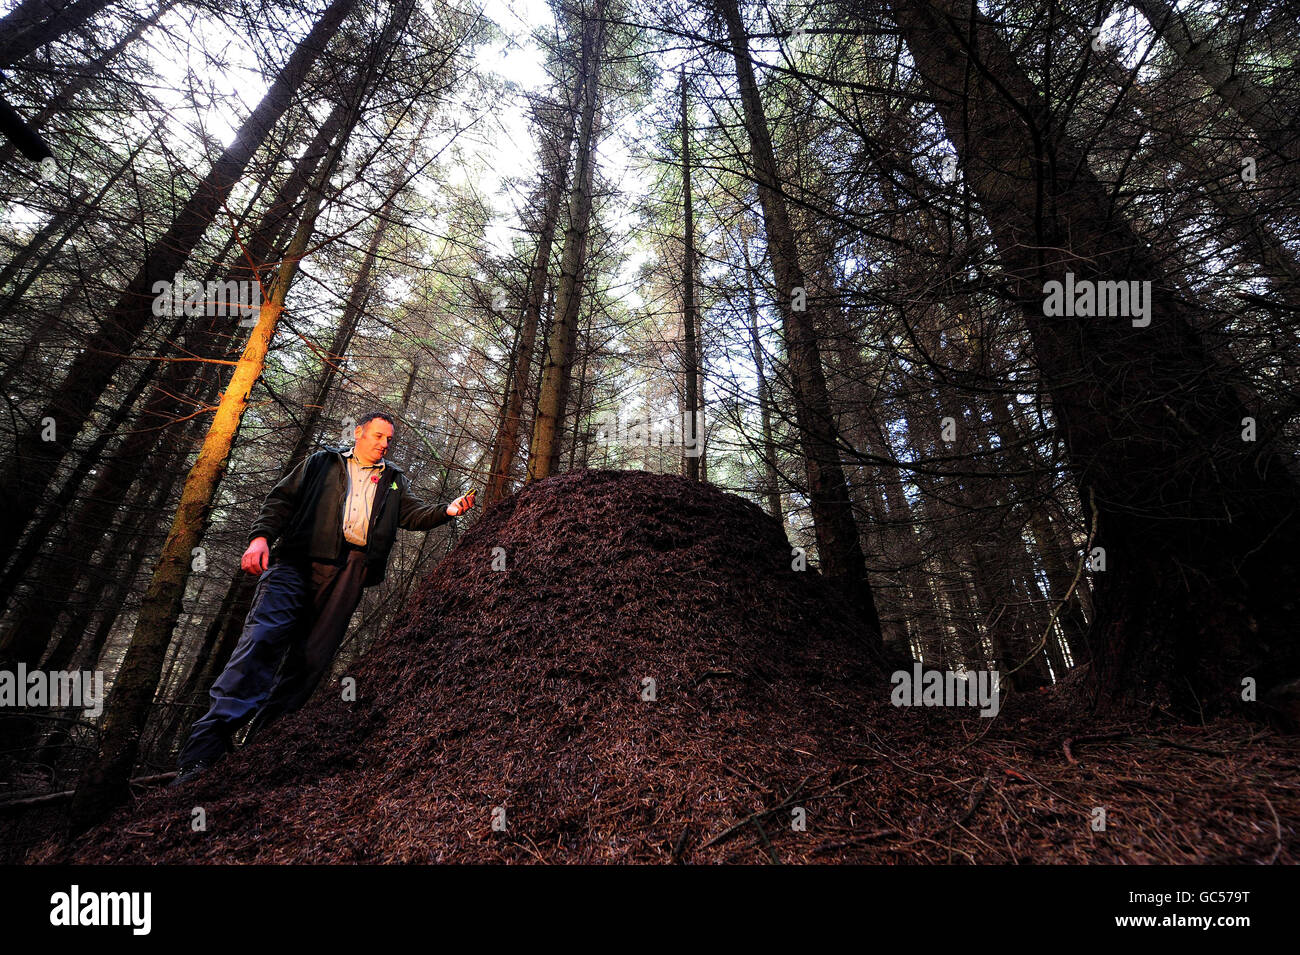 Jonathan Farries from the forestry Commission checks the GPS settings on one of the rare giant hairy northern wood ant nests in the Holystone forest in Rothbury in Northumberland. Stock Photo